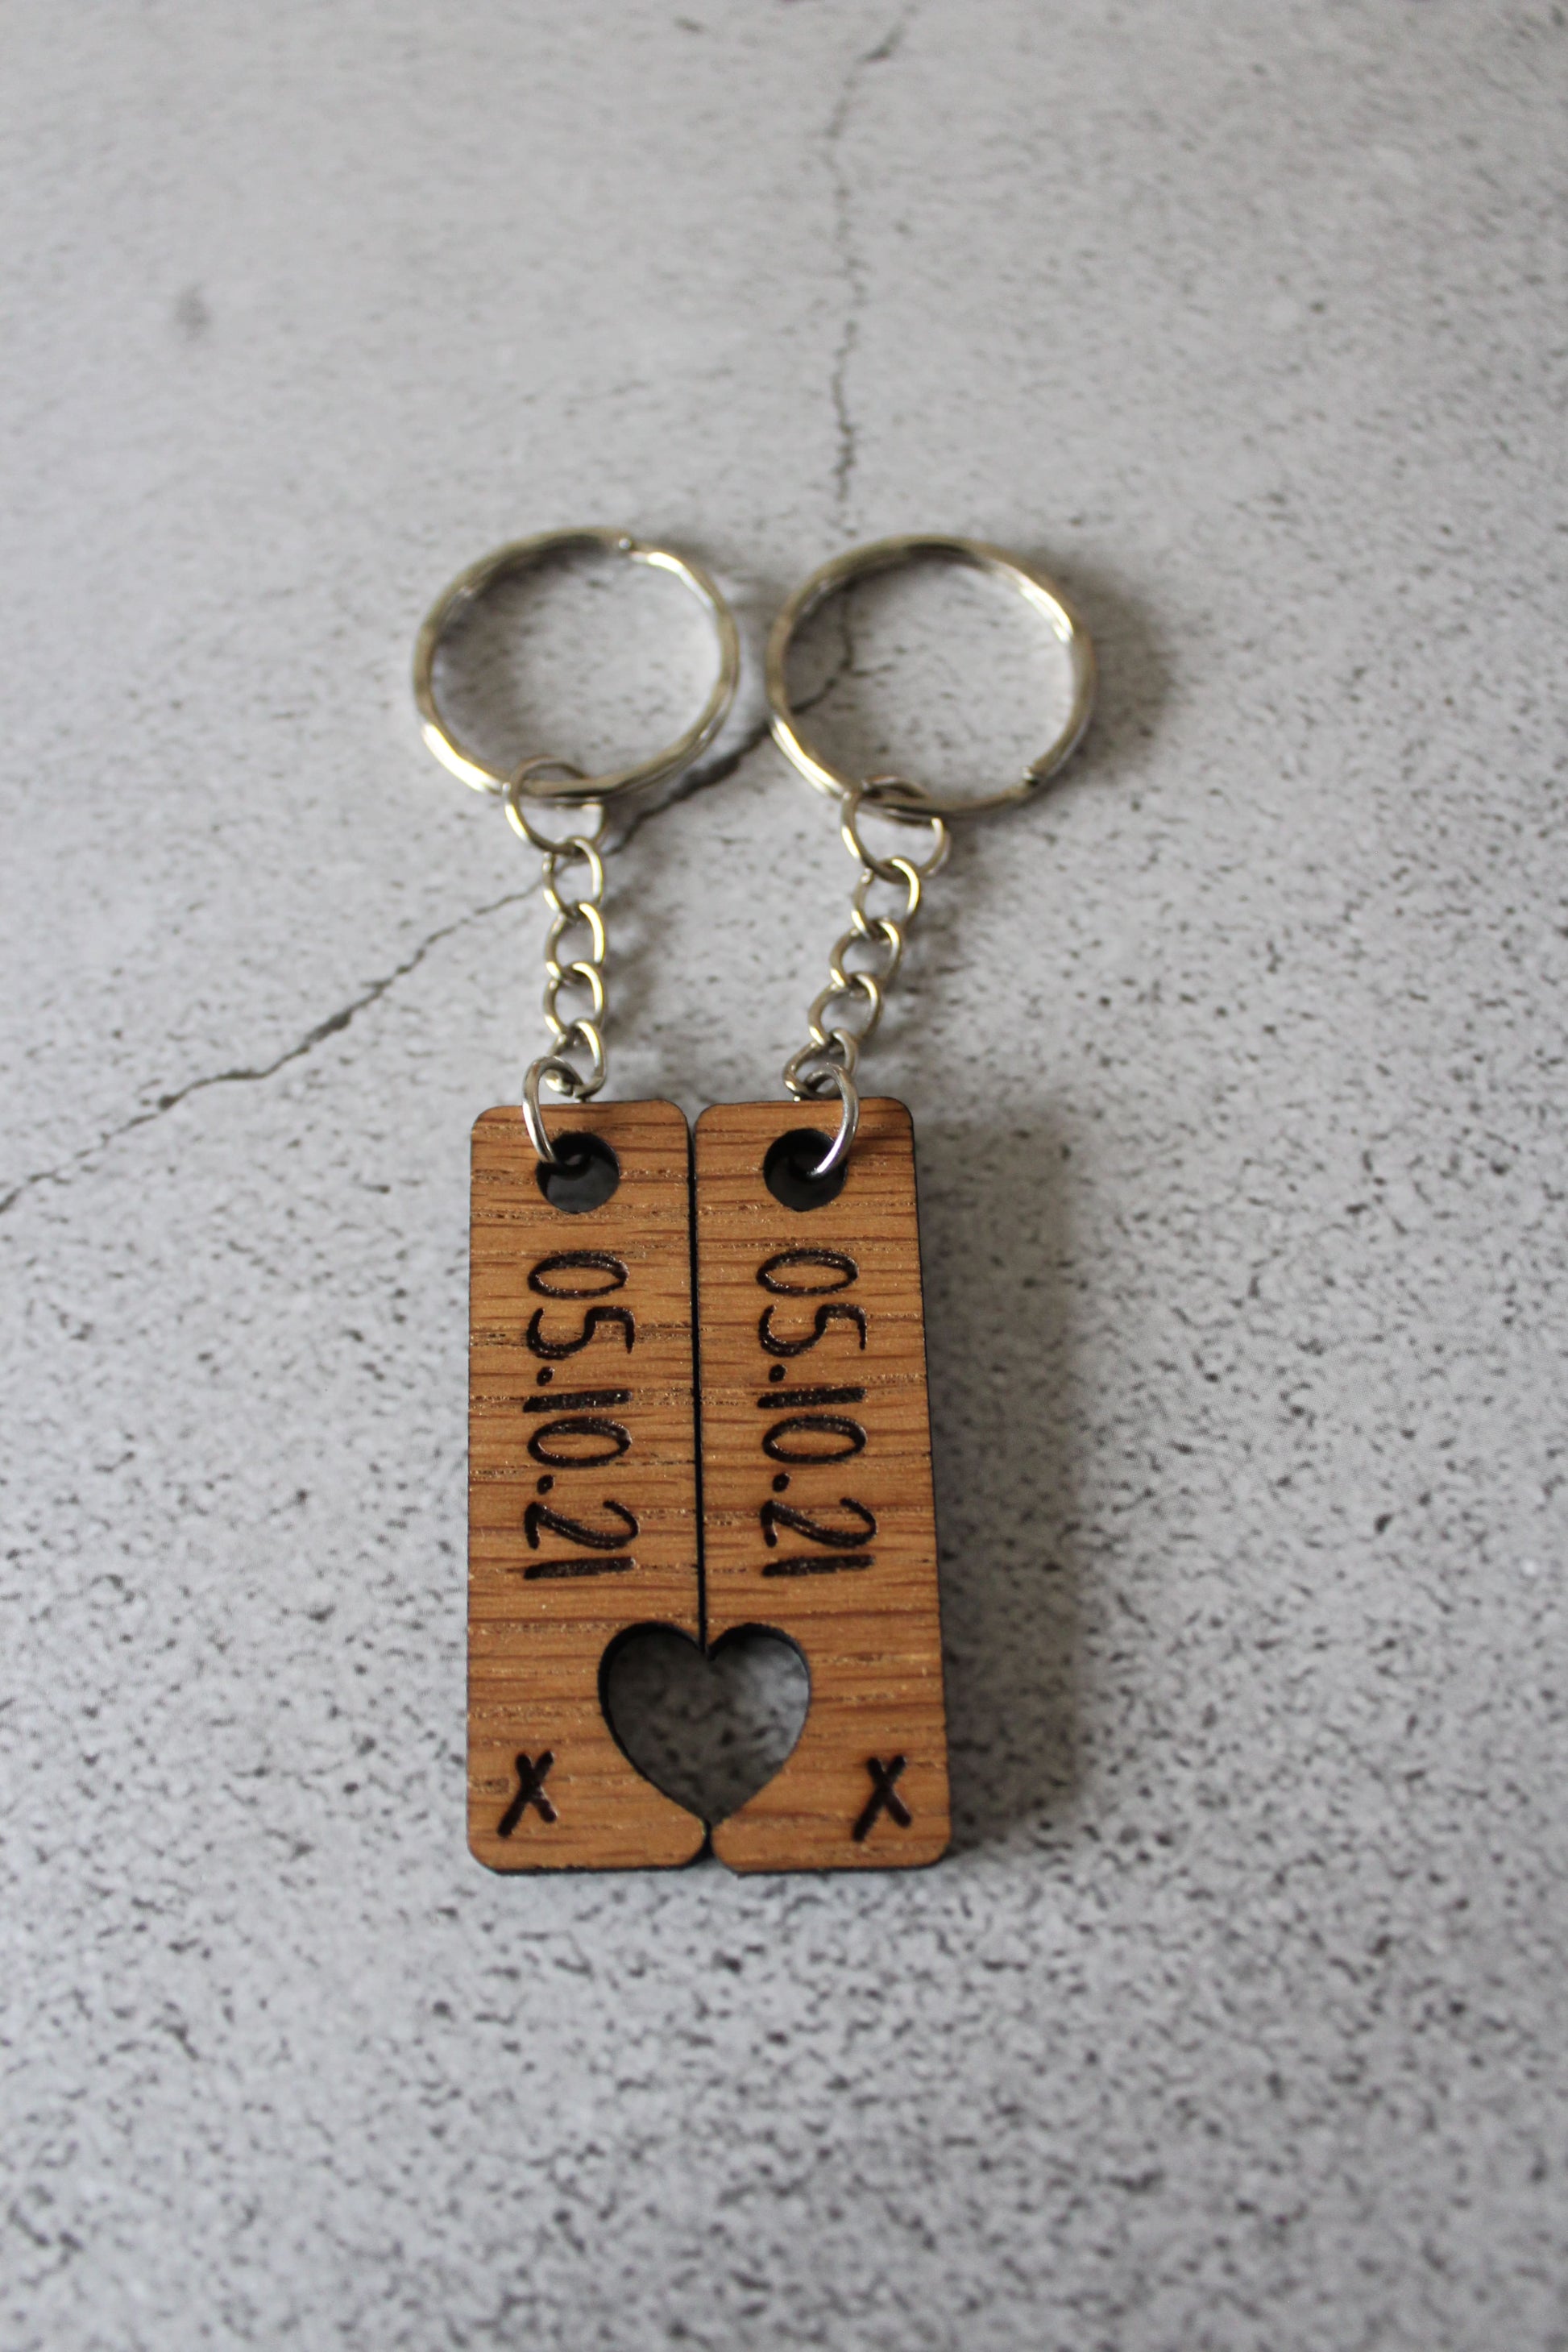 Customized Keychains with Photo Engraved | My Couple Goal Heart Rough Surface